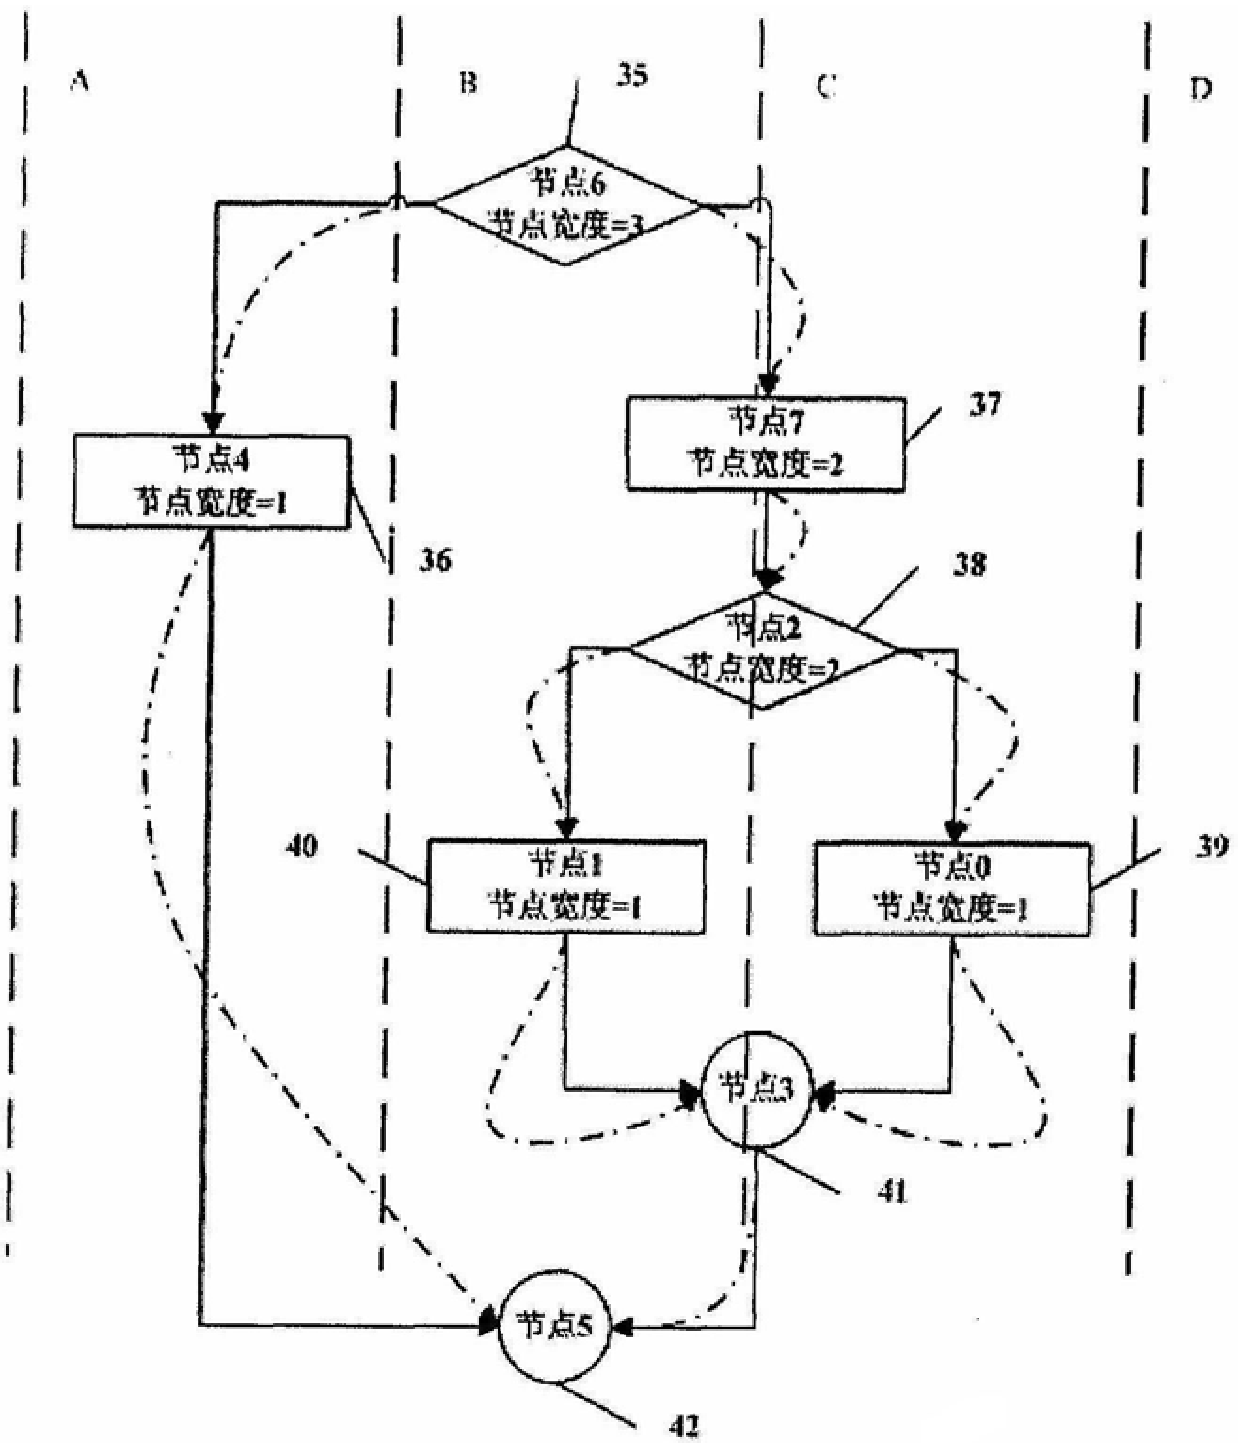 A Method for Generating Process-Oriented High-level Language Source Program Flowchart